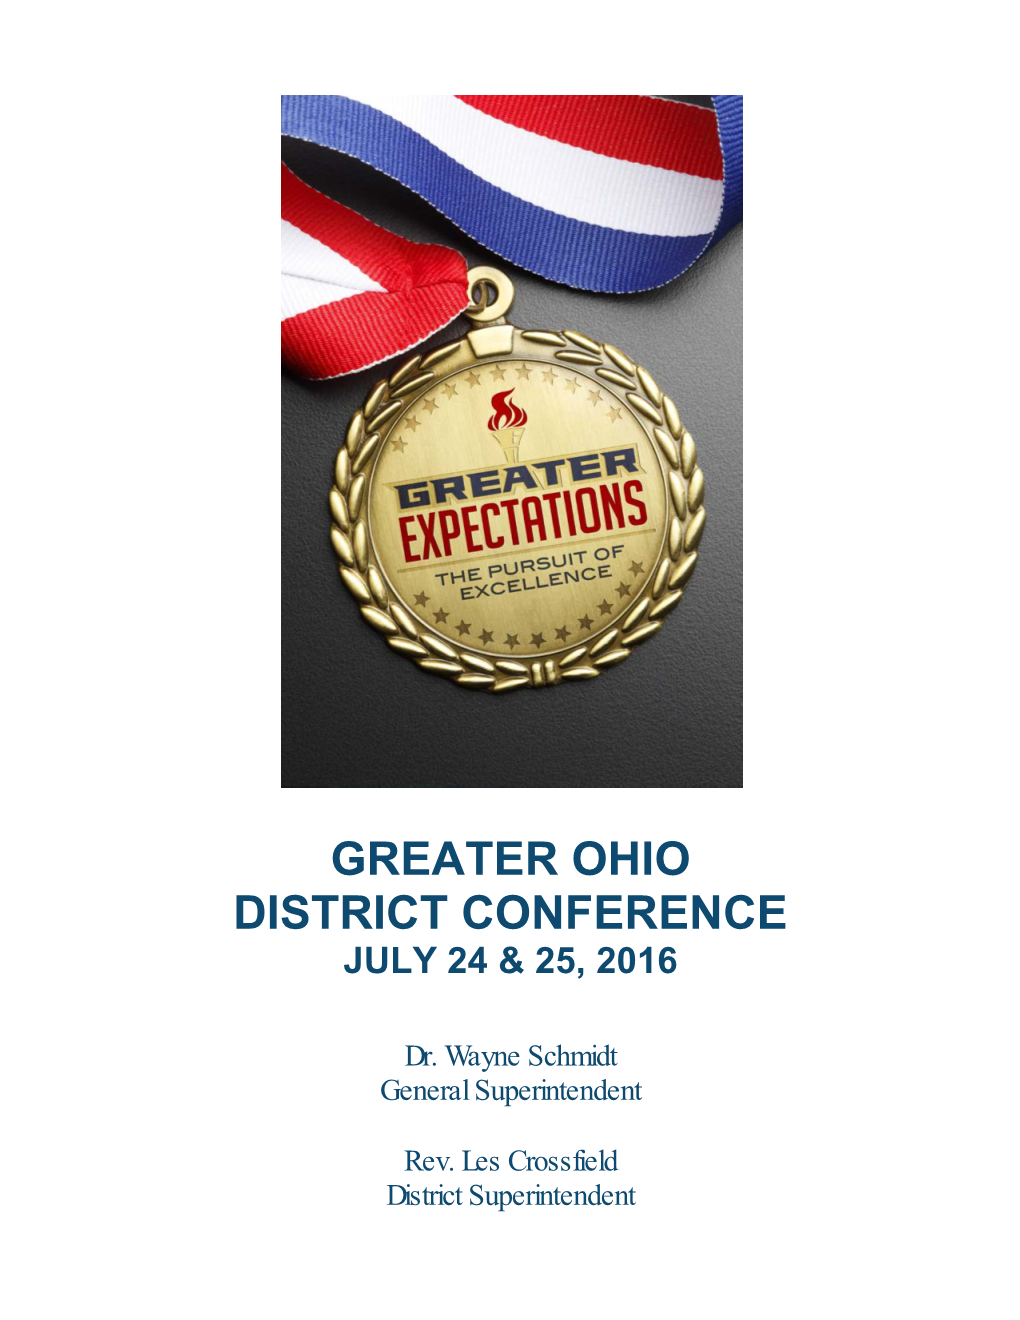 Greater Ohio District Conference July 24 & 25, 2016